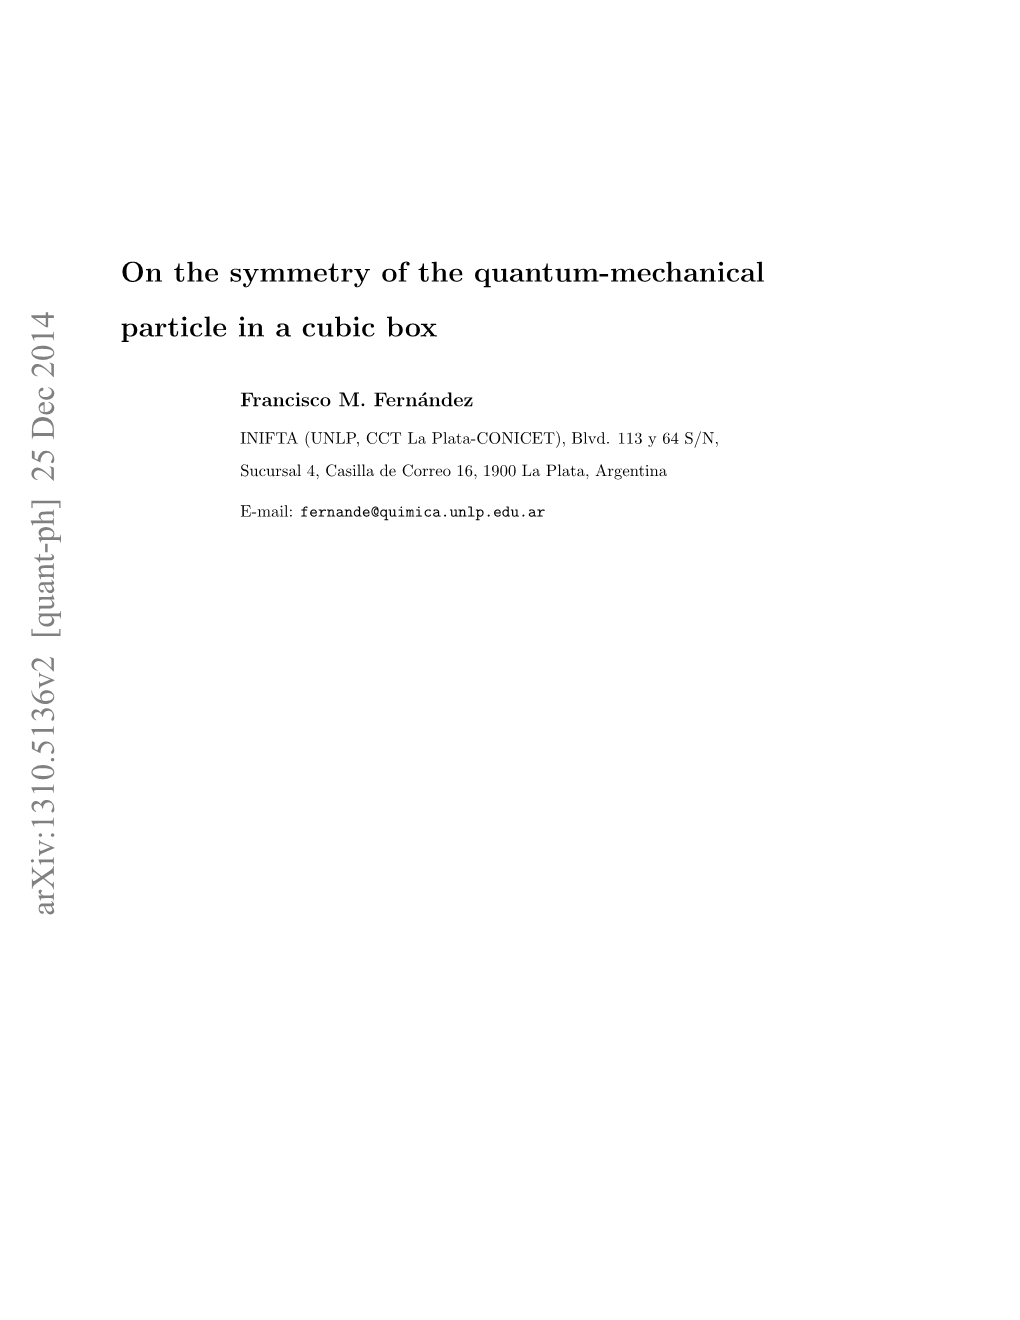 On the Symmetry of the Quantum-Mechanical Particle in a Cubic Box Arxiv:1310.5136 [Quant-Ph] [9] Hern´Andez-Castillo a O and Lemus R 2013 J